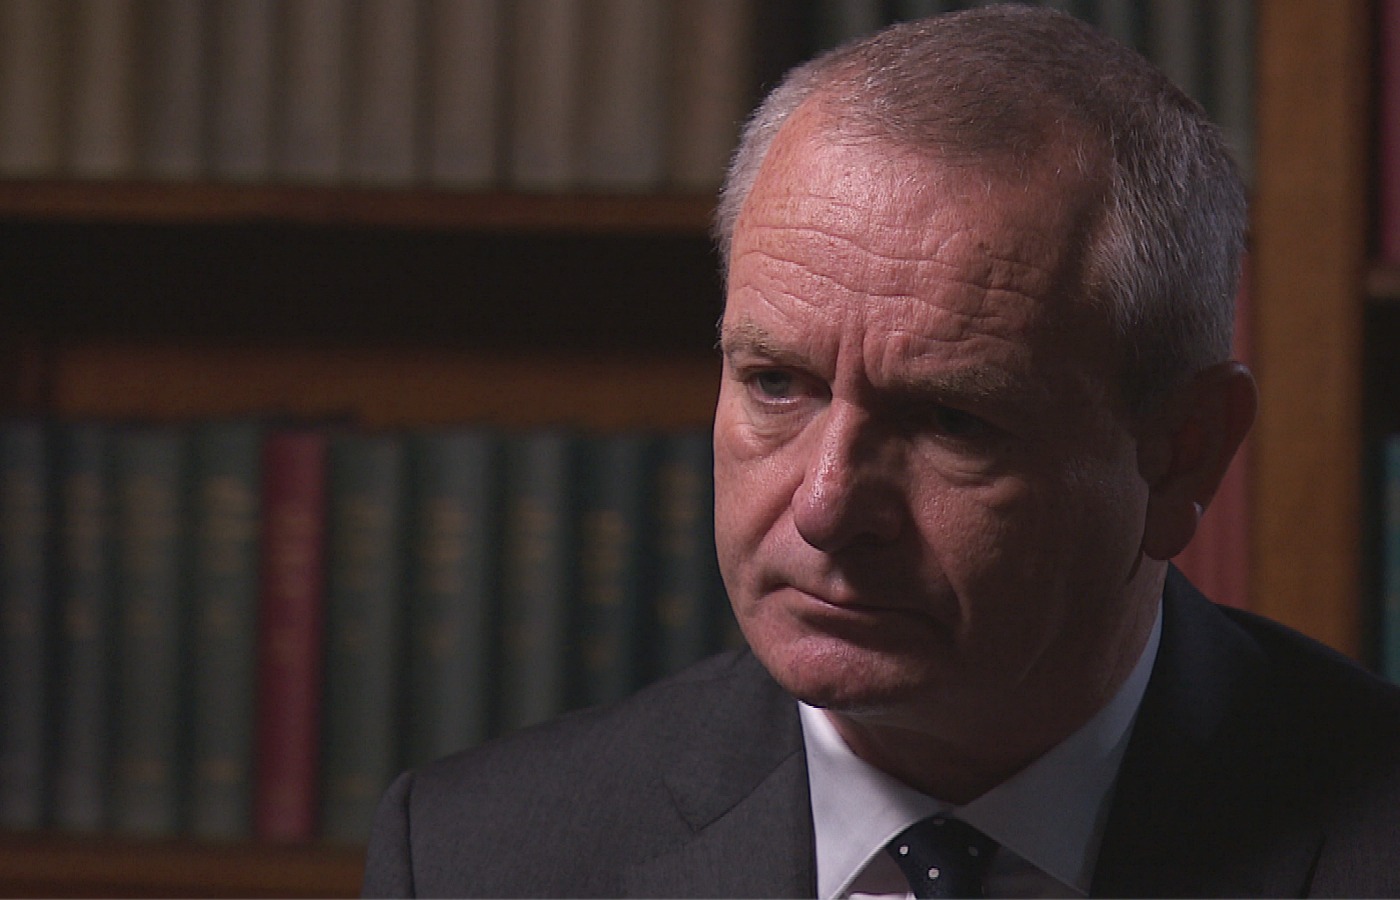 Sir Iain Livingstone said the Police Scotland investigation into the SNP has not been impacted by politics.